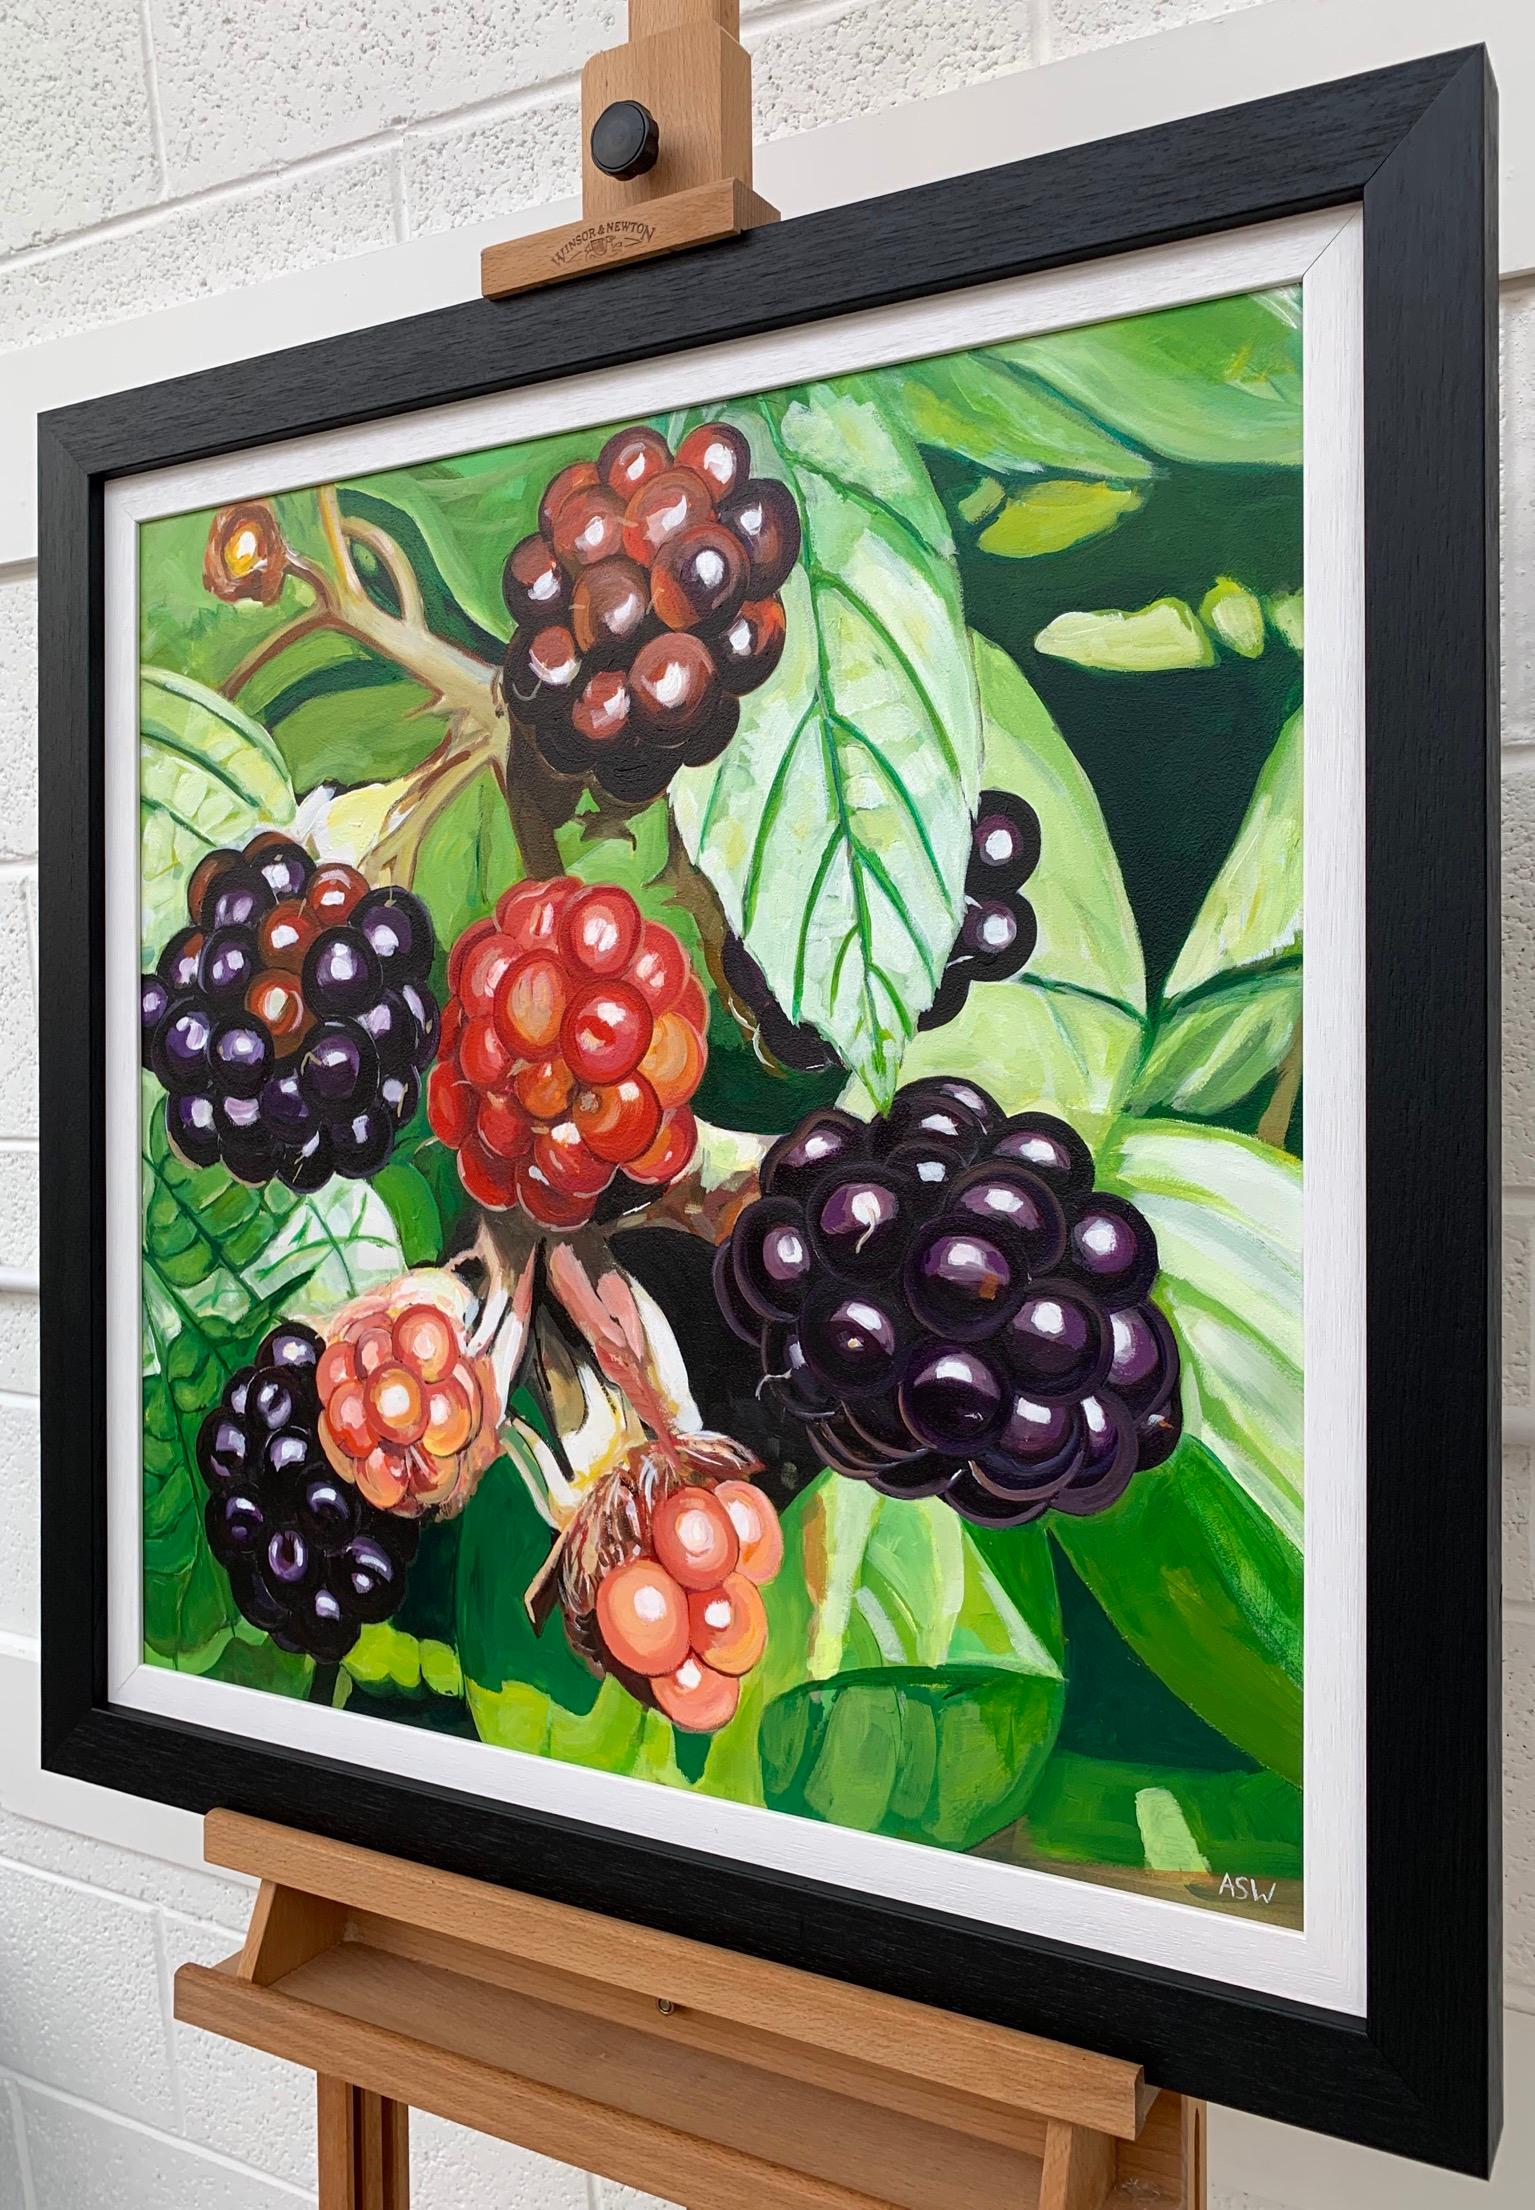 Colourful painting of Wild Blackberries in Sunshine in a beautiful English Country Garden by leading British Landscape Artist, Angela Wakefield. 

Art measures 24 x 24 inches
Frame measures 29 x 29 inches 

Angela Wakefield has twice been on the